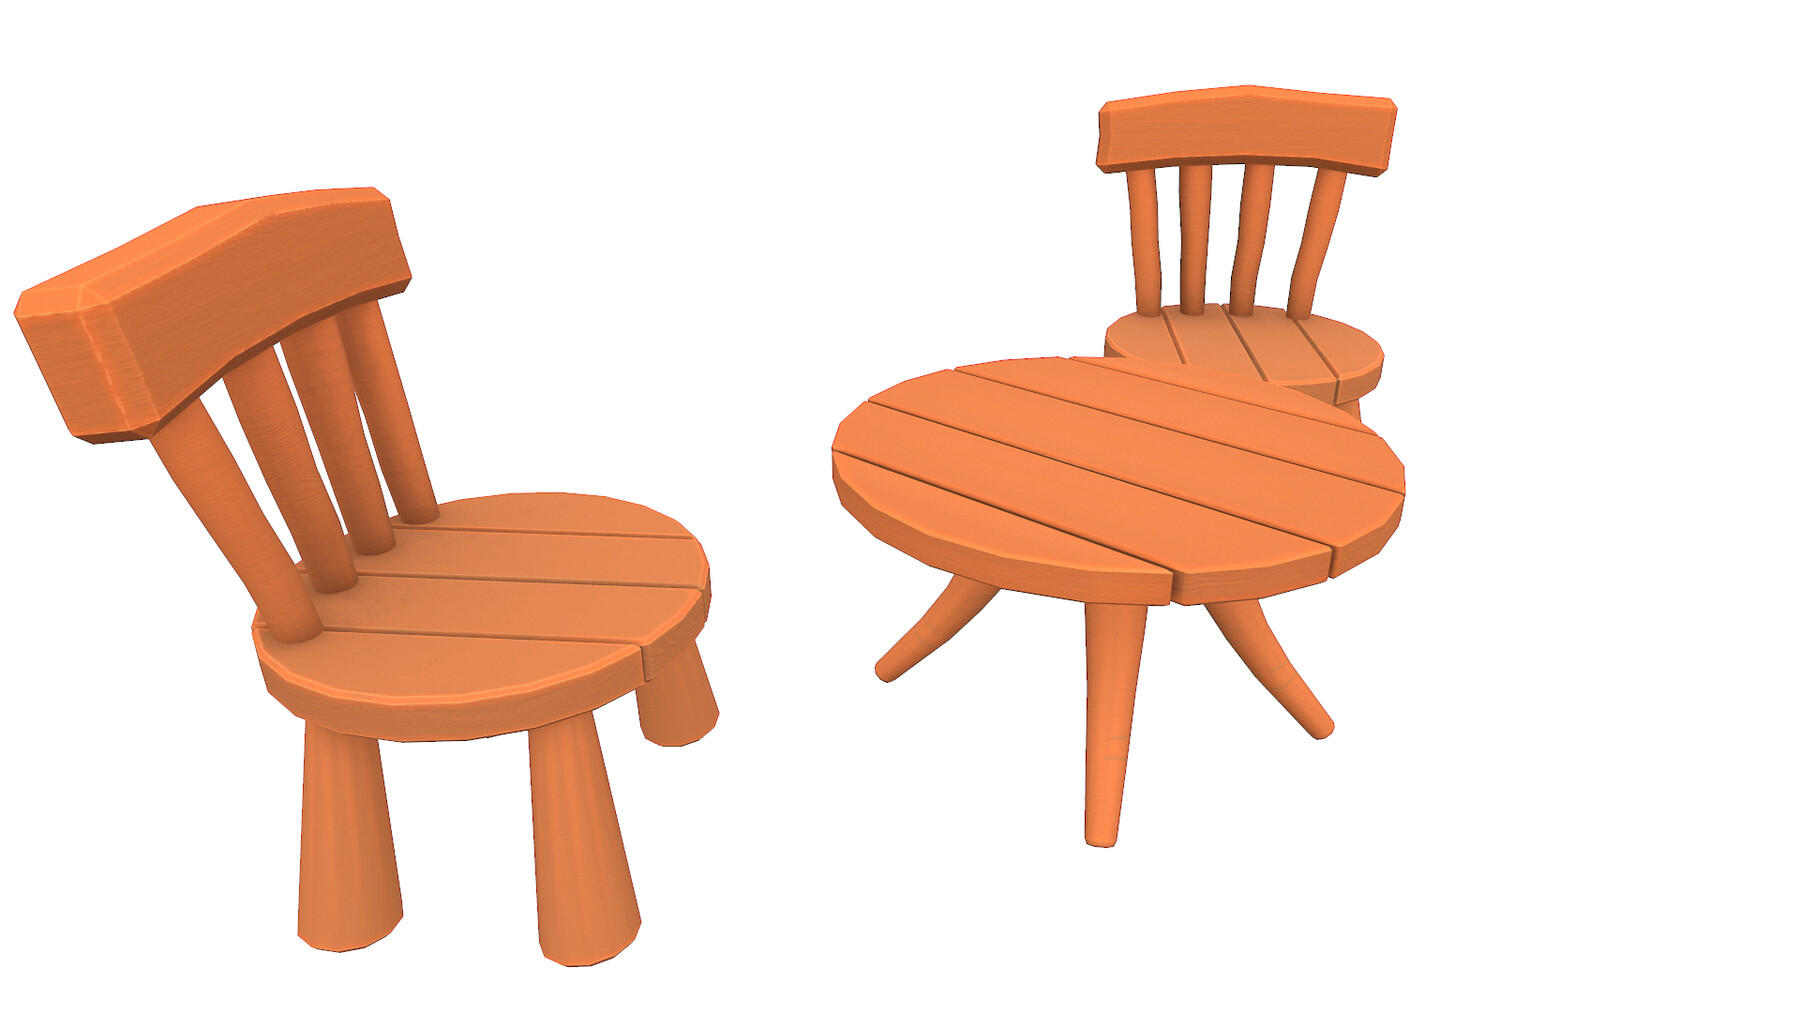 ArtStation - Cartoon Chair and Table | Game Assets